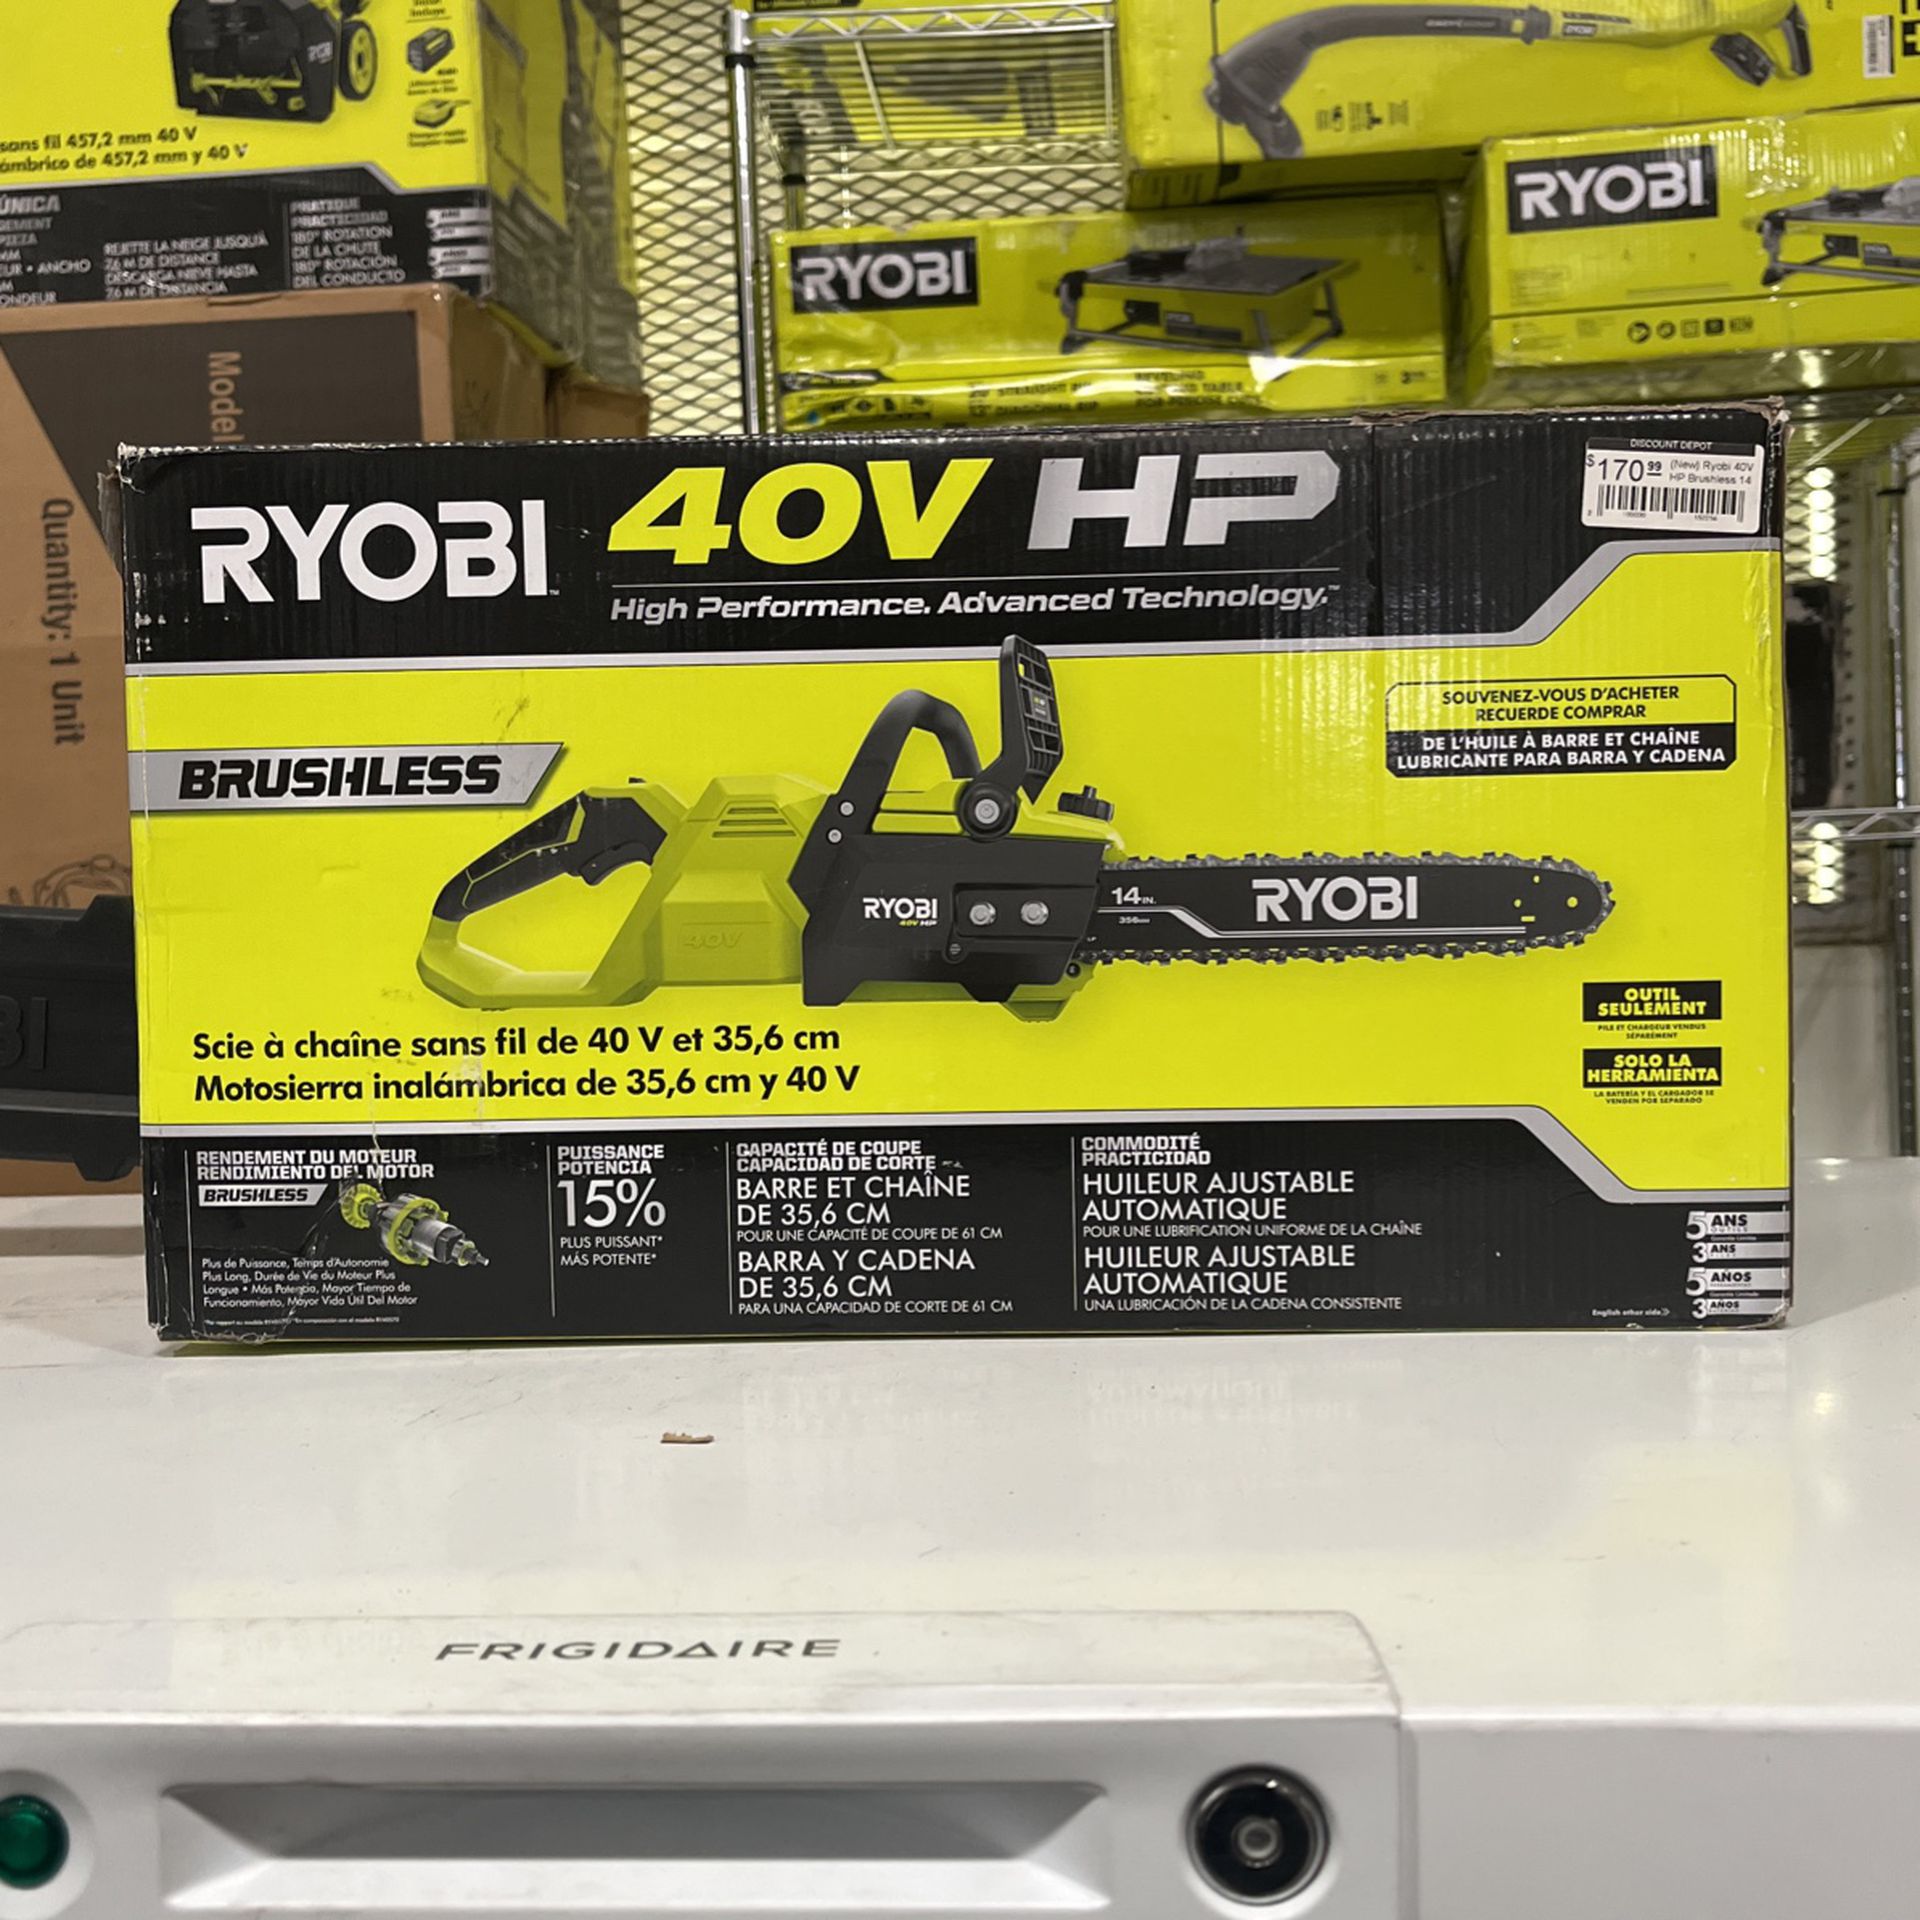 RYOBI 40V HP Brushless 14 in. Battery Chainsaw (Tool Only